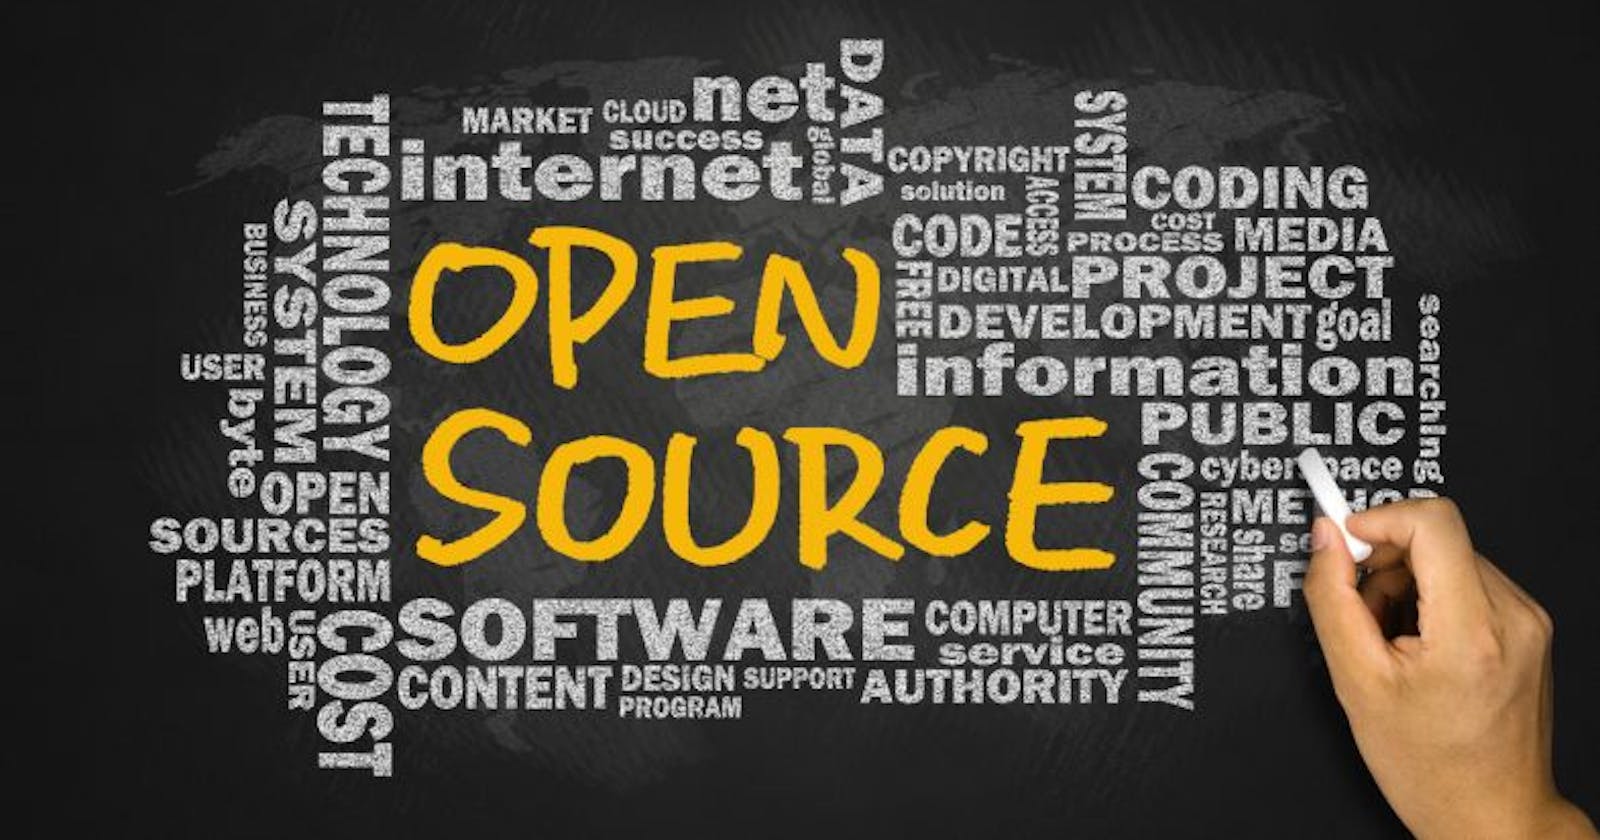 From using Open Source Software to Contributing to it